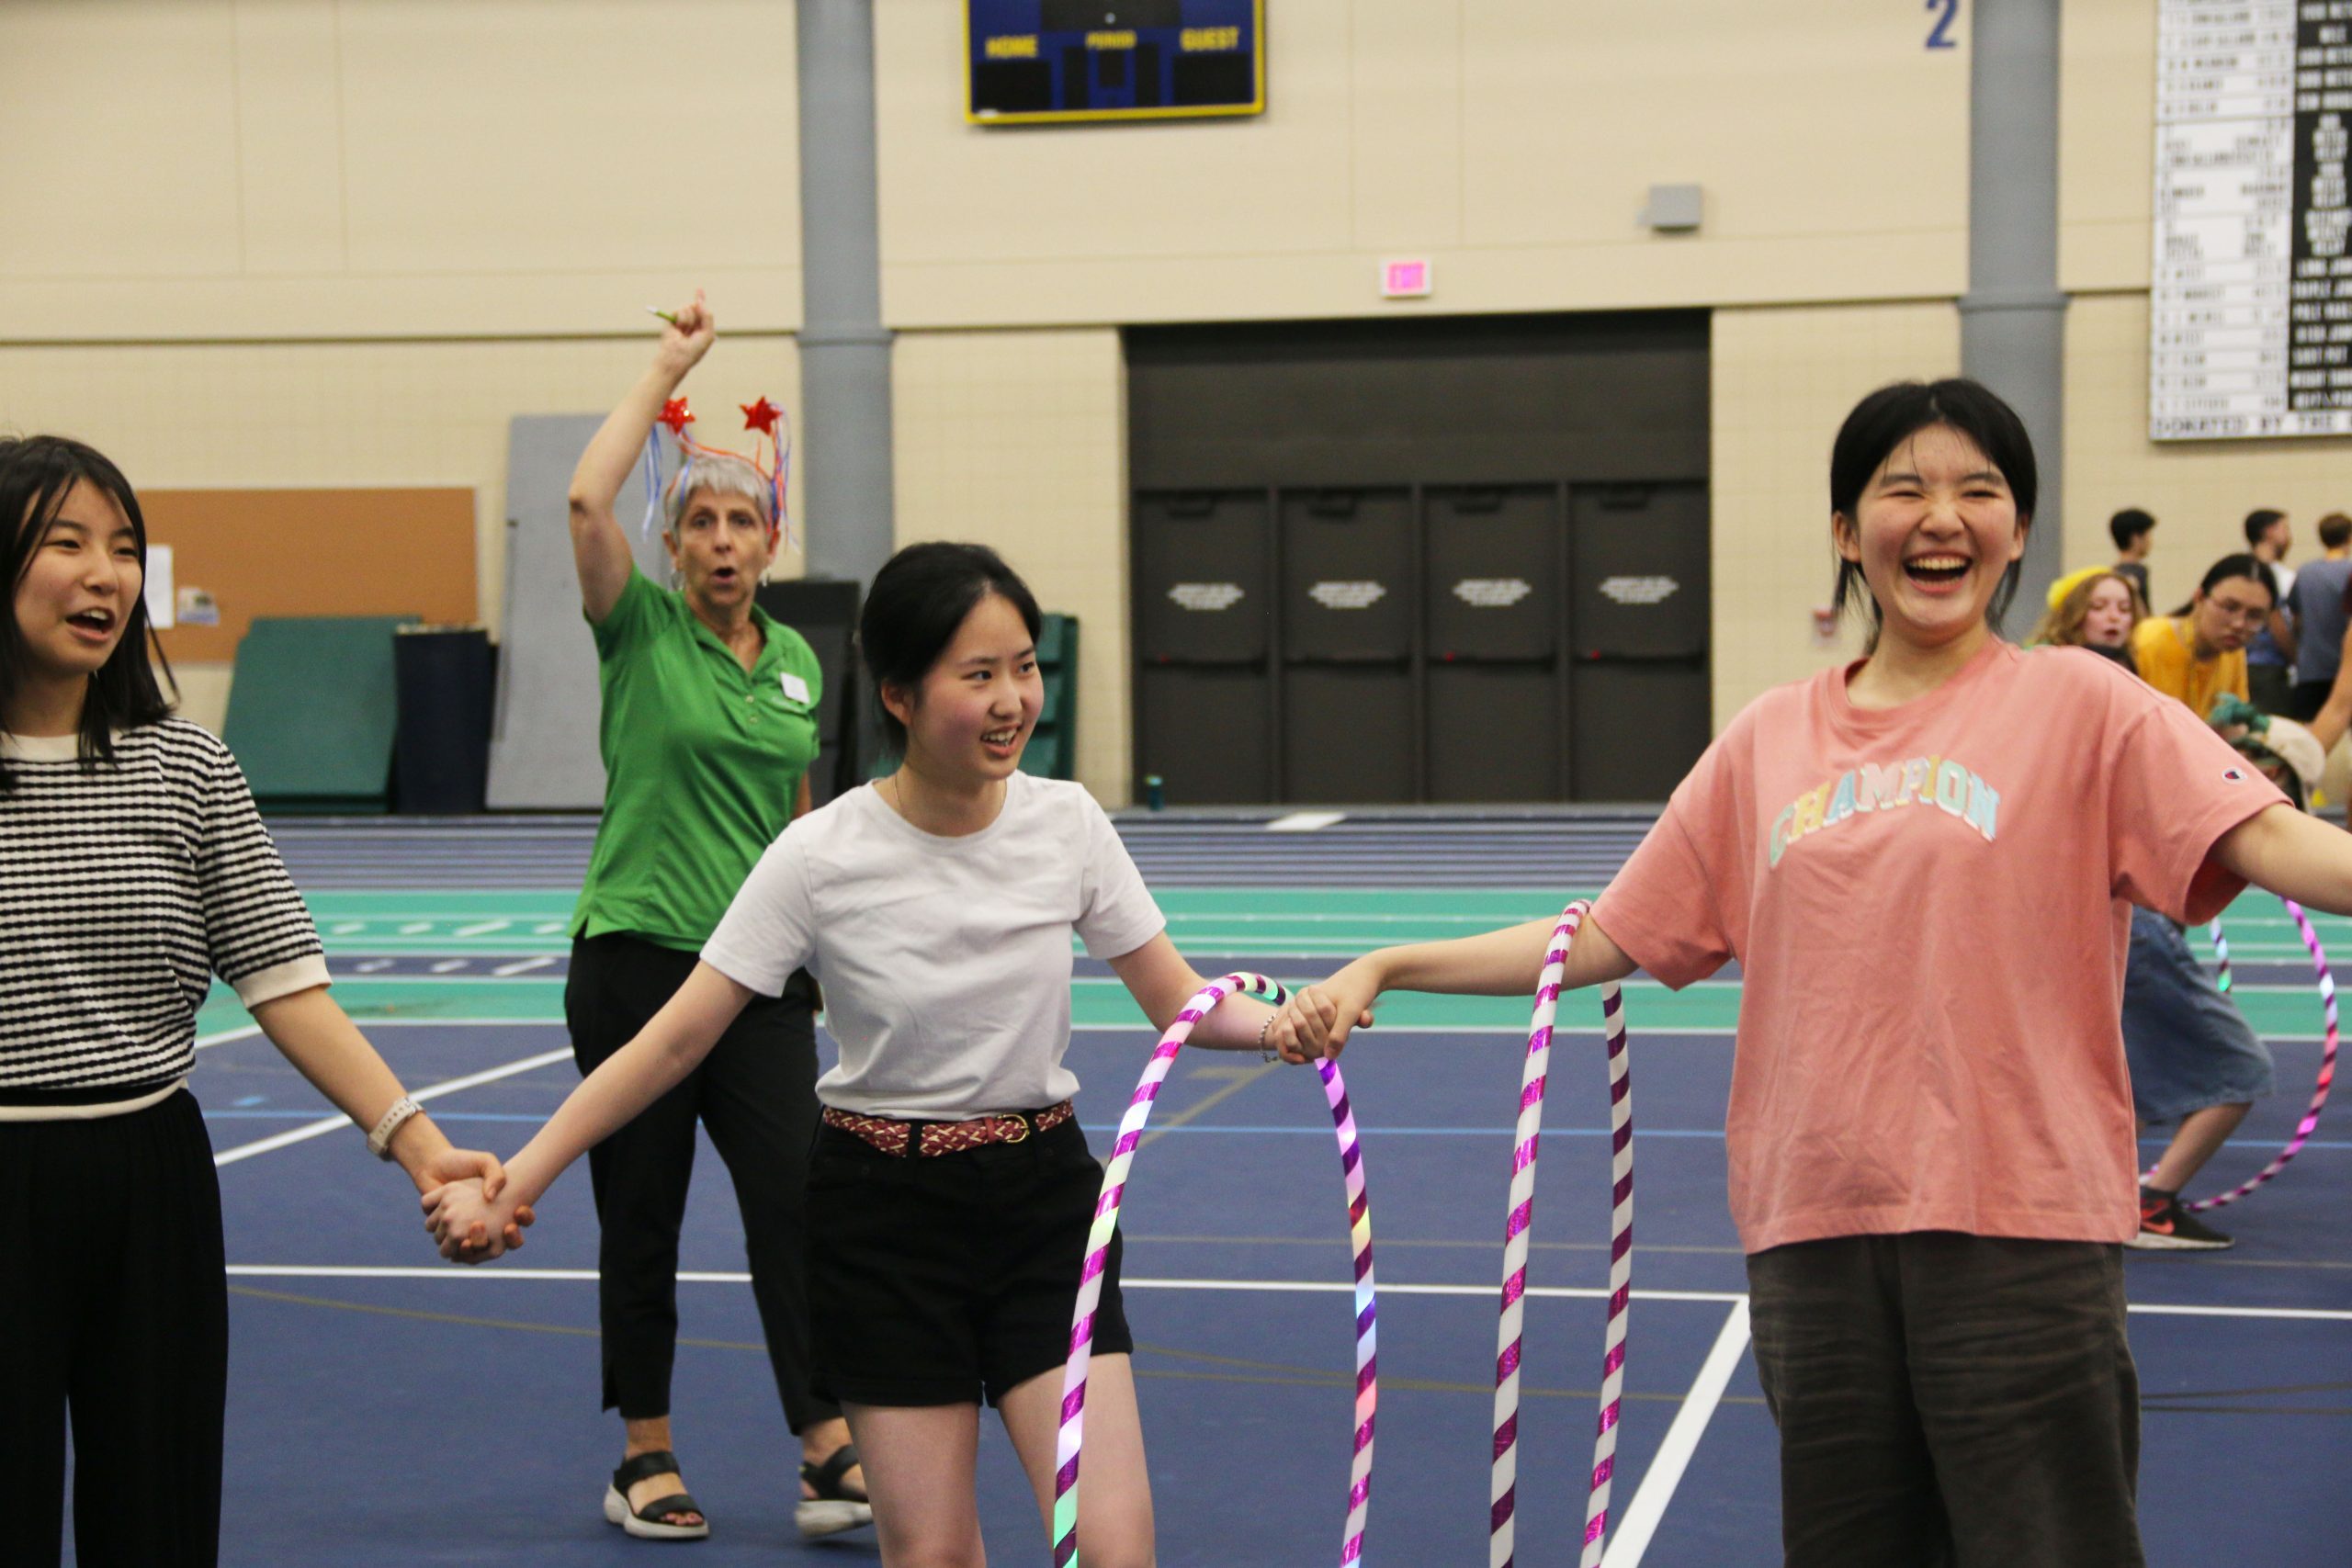 Three laughing students grasp hands with hula hoops hanging on their arms.